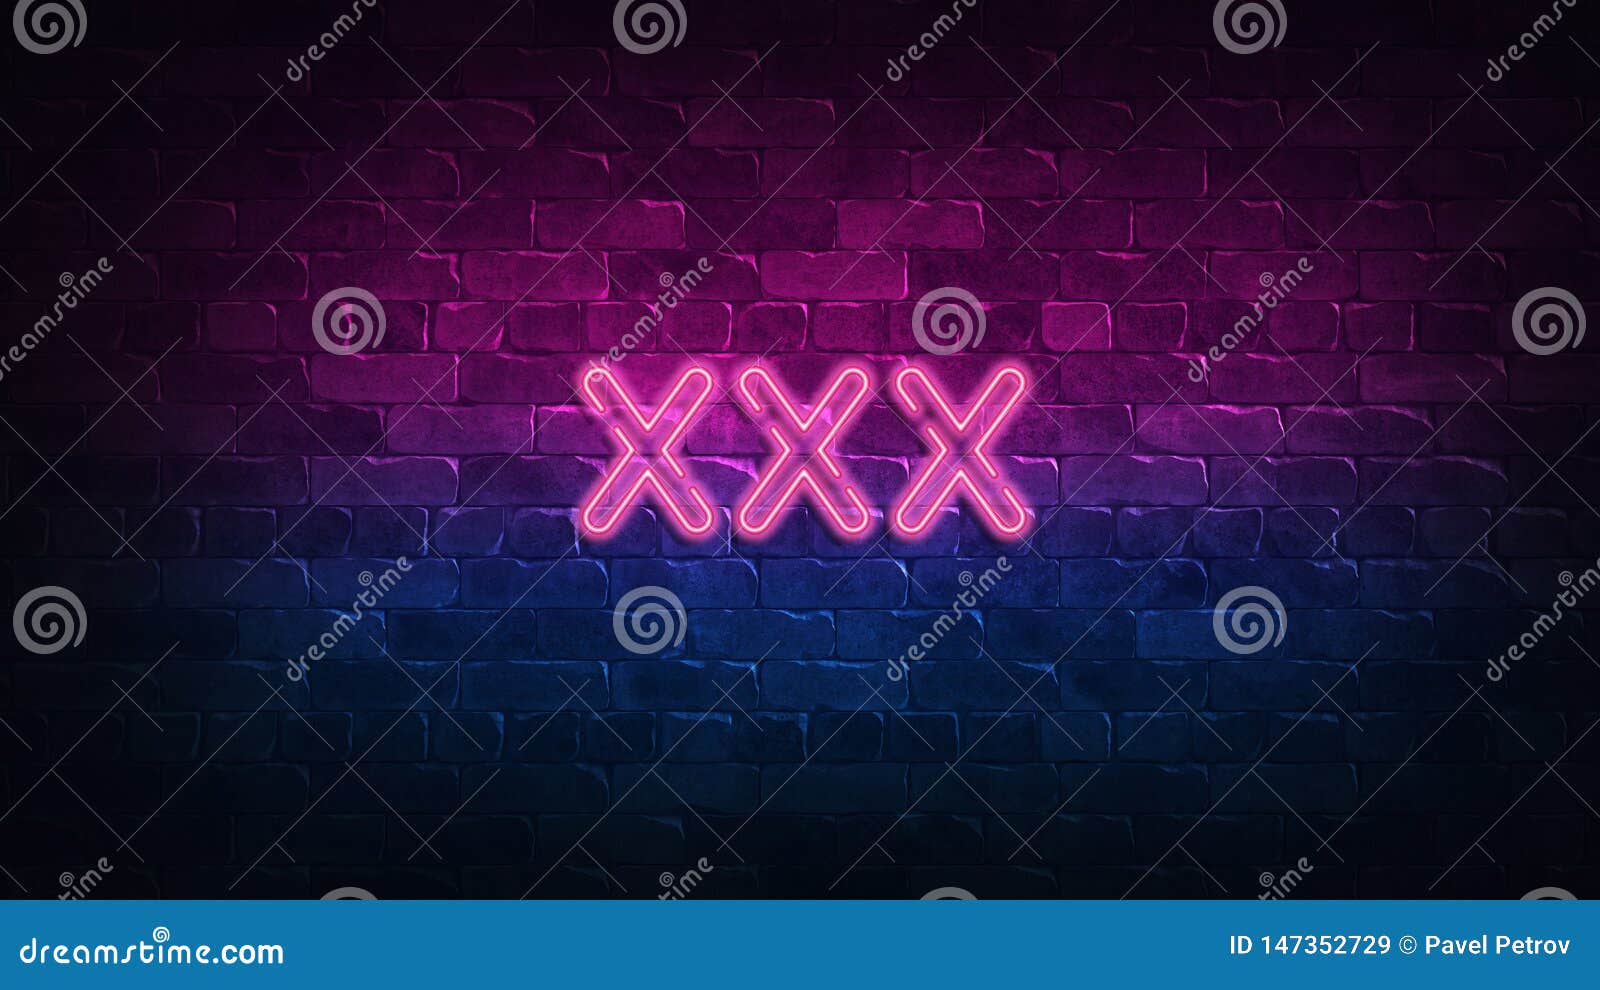 Xxx Neon Sign Purple And Blue Glow Neon Text Brick Wall Lit By Neon Lamps Night Lighting On 